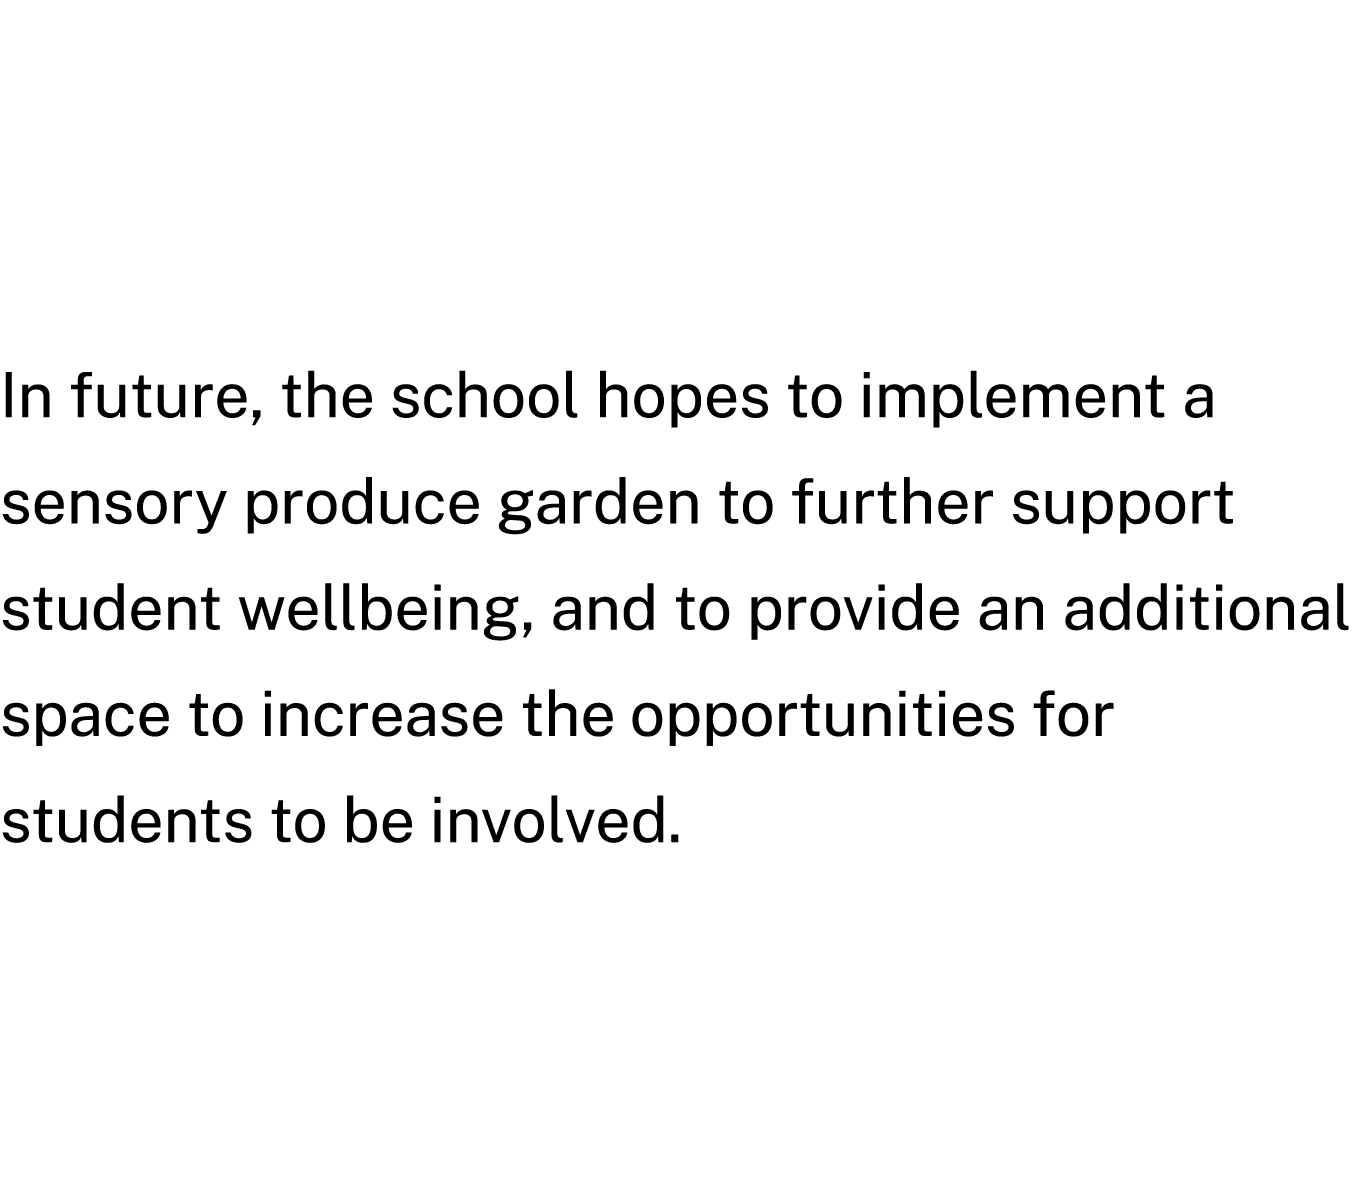 In future, the school hopes to implement a sensory produce garden to further support student wellbeing, and to provid...